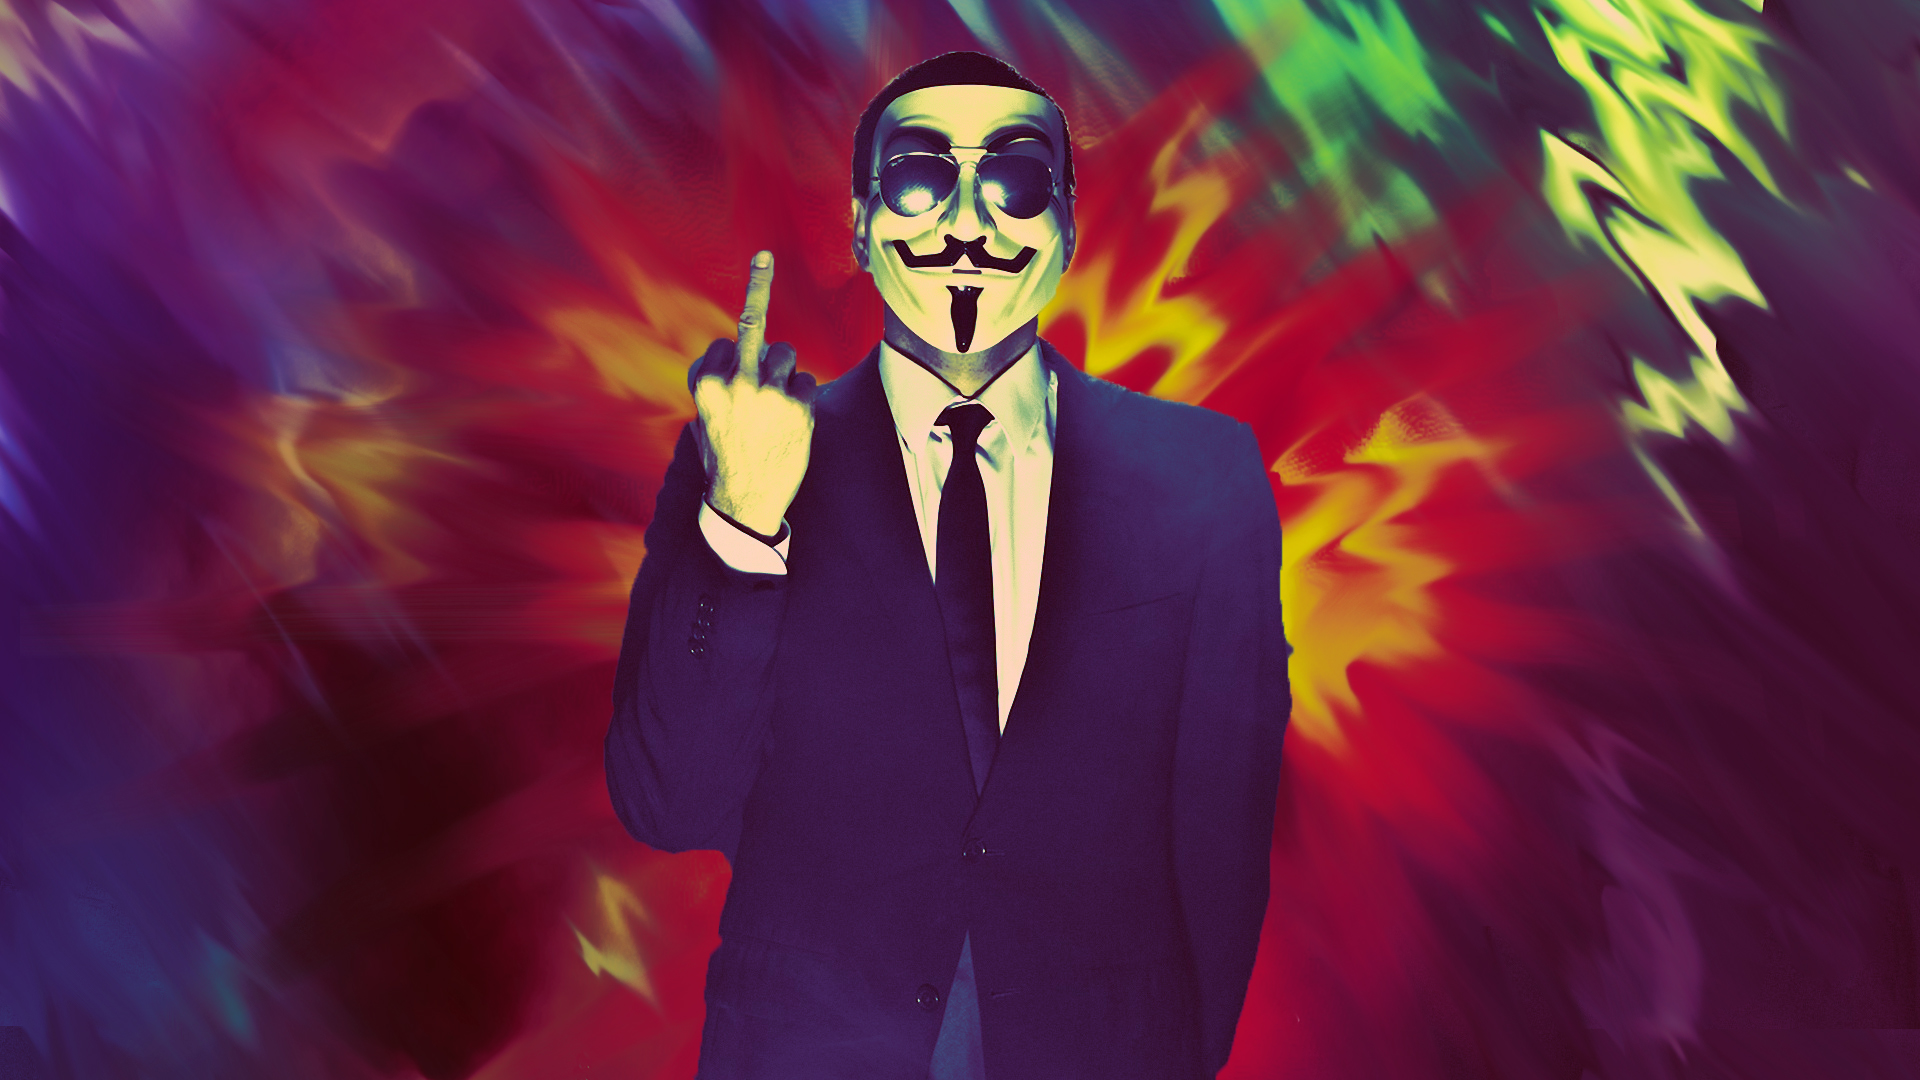 Anonymous Sick Wallpaper By Freshofficial